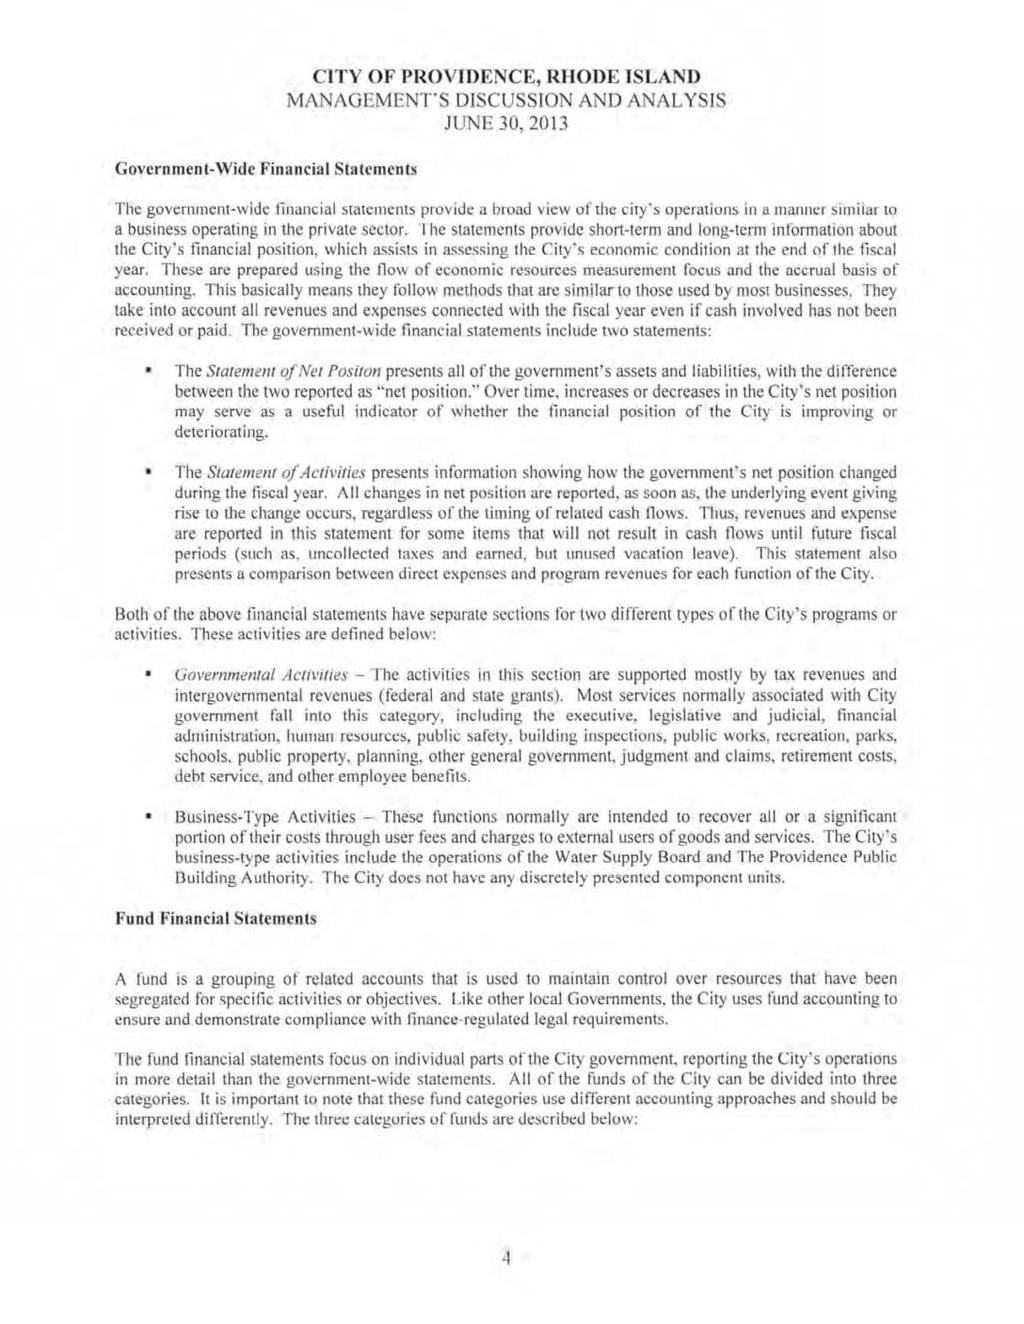 Government-Wide Financial Statements CITY OF PROVIDENCE, RHODE ISLAND MANAGEMENT'S DISCUSSION AND ANALYSIS JUNE 30,2013 The government-wide financial statements provide a broad view of the city's